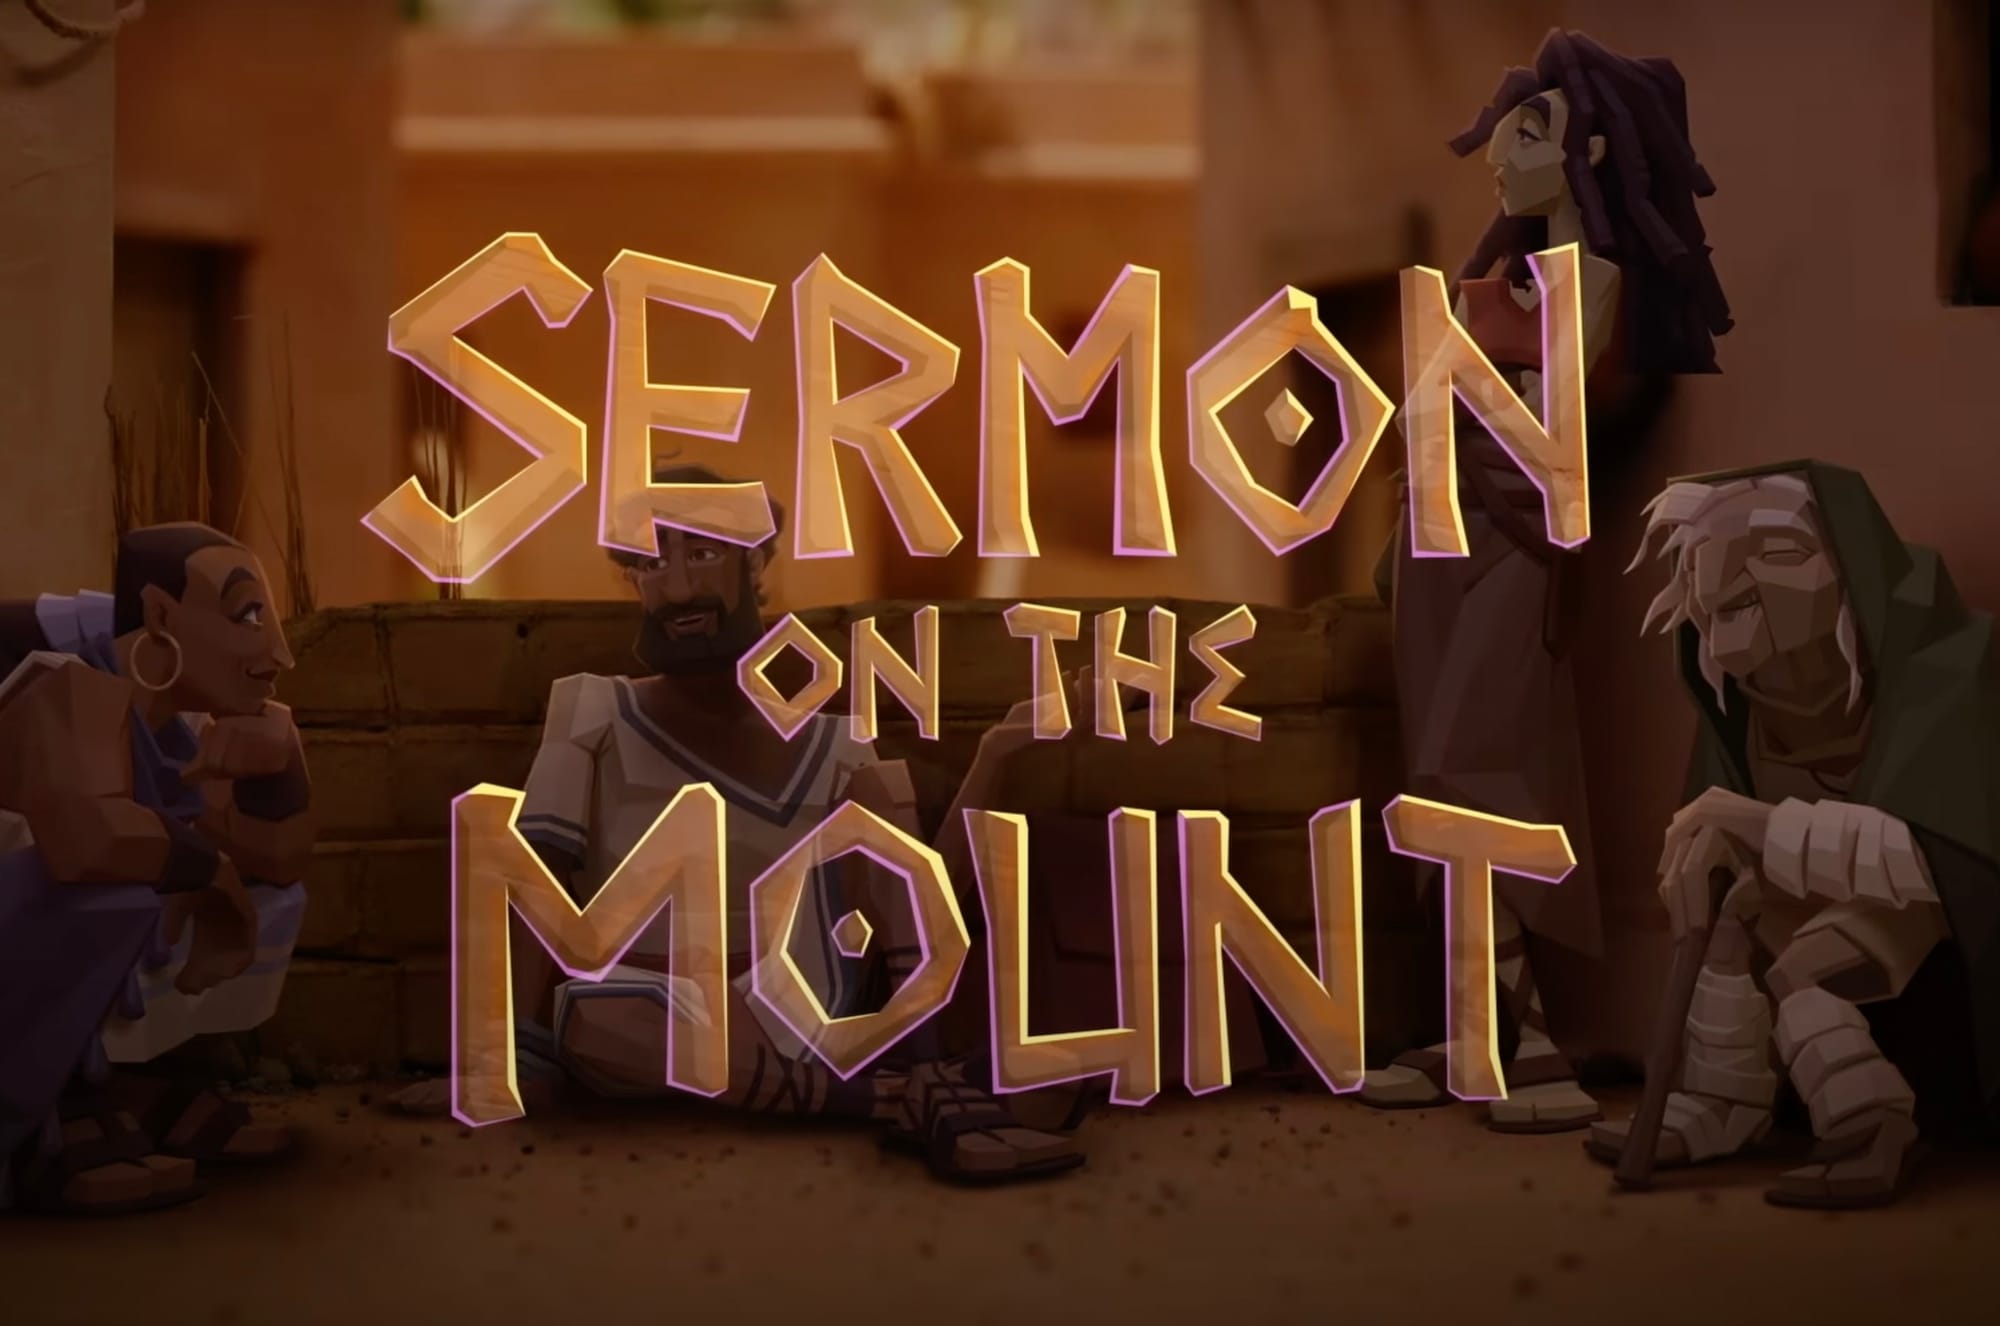 The Bible Project Announces Their Next Major Work: "The Sermon on the Mount"